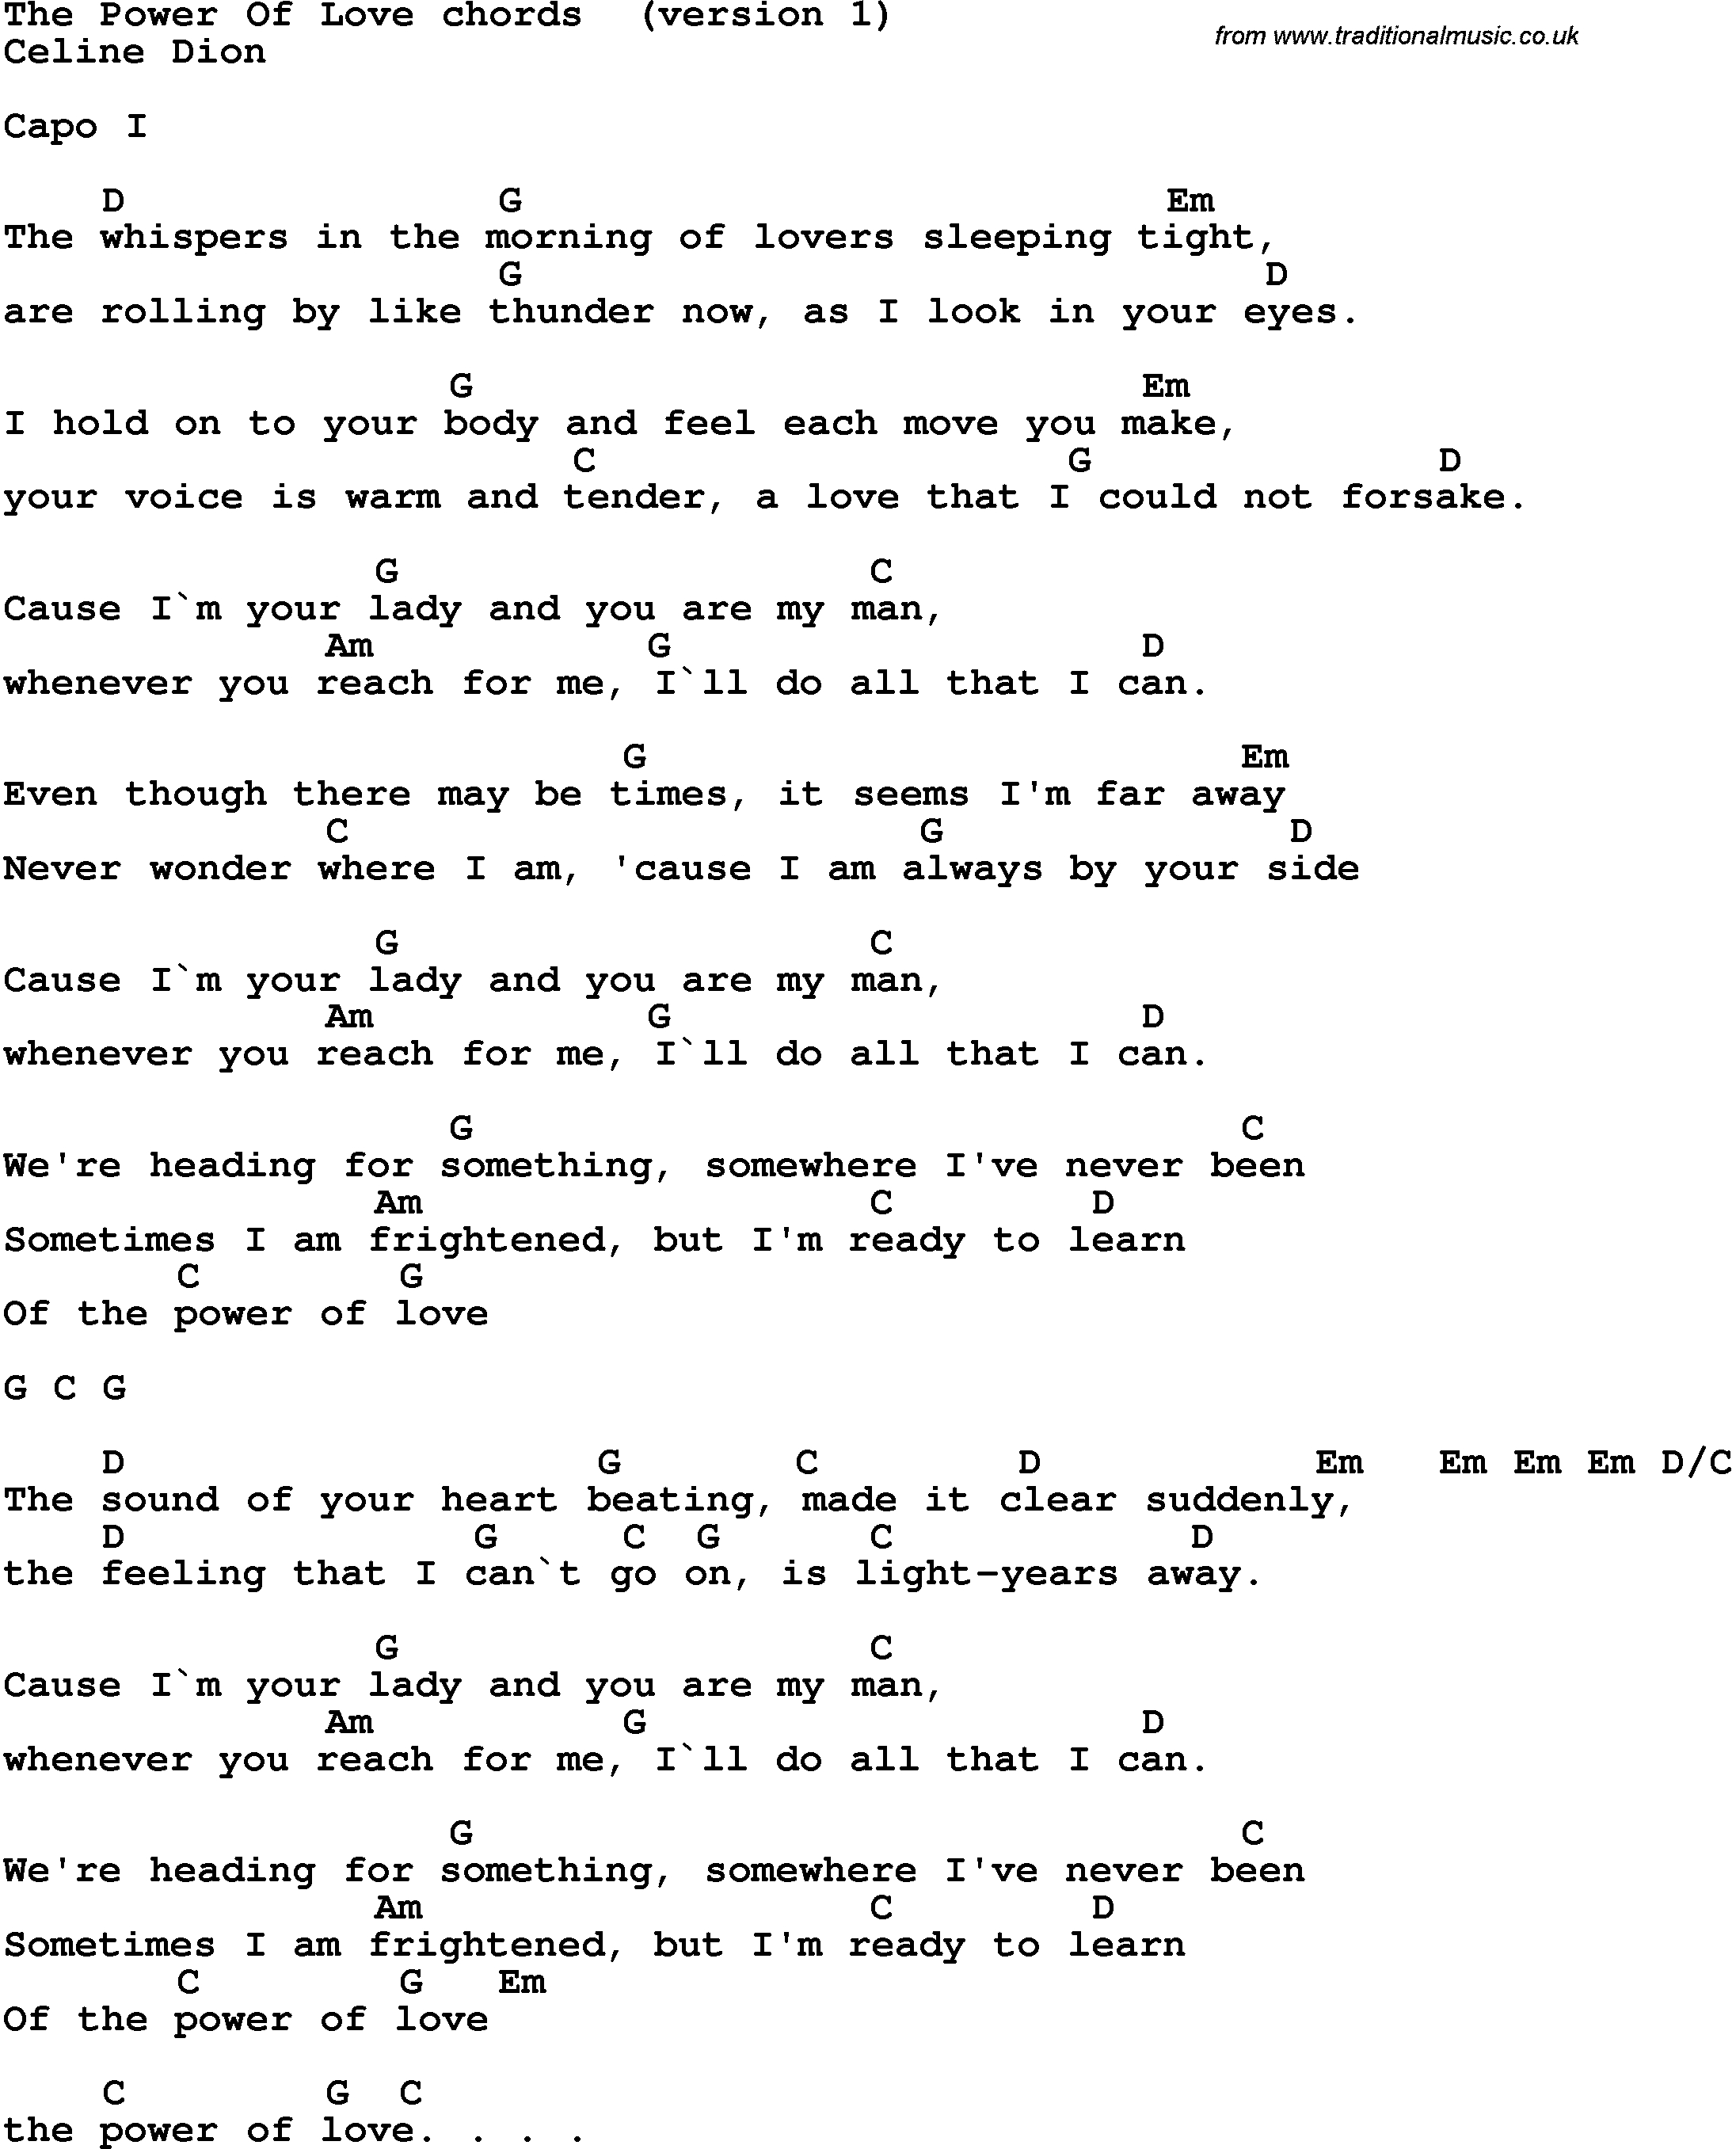 Make You Feel My Love Chords Song Lyrics With Guitar Chords For The Power Of Love Celine Dion